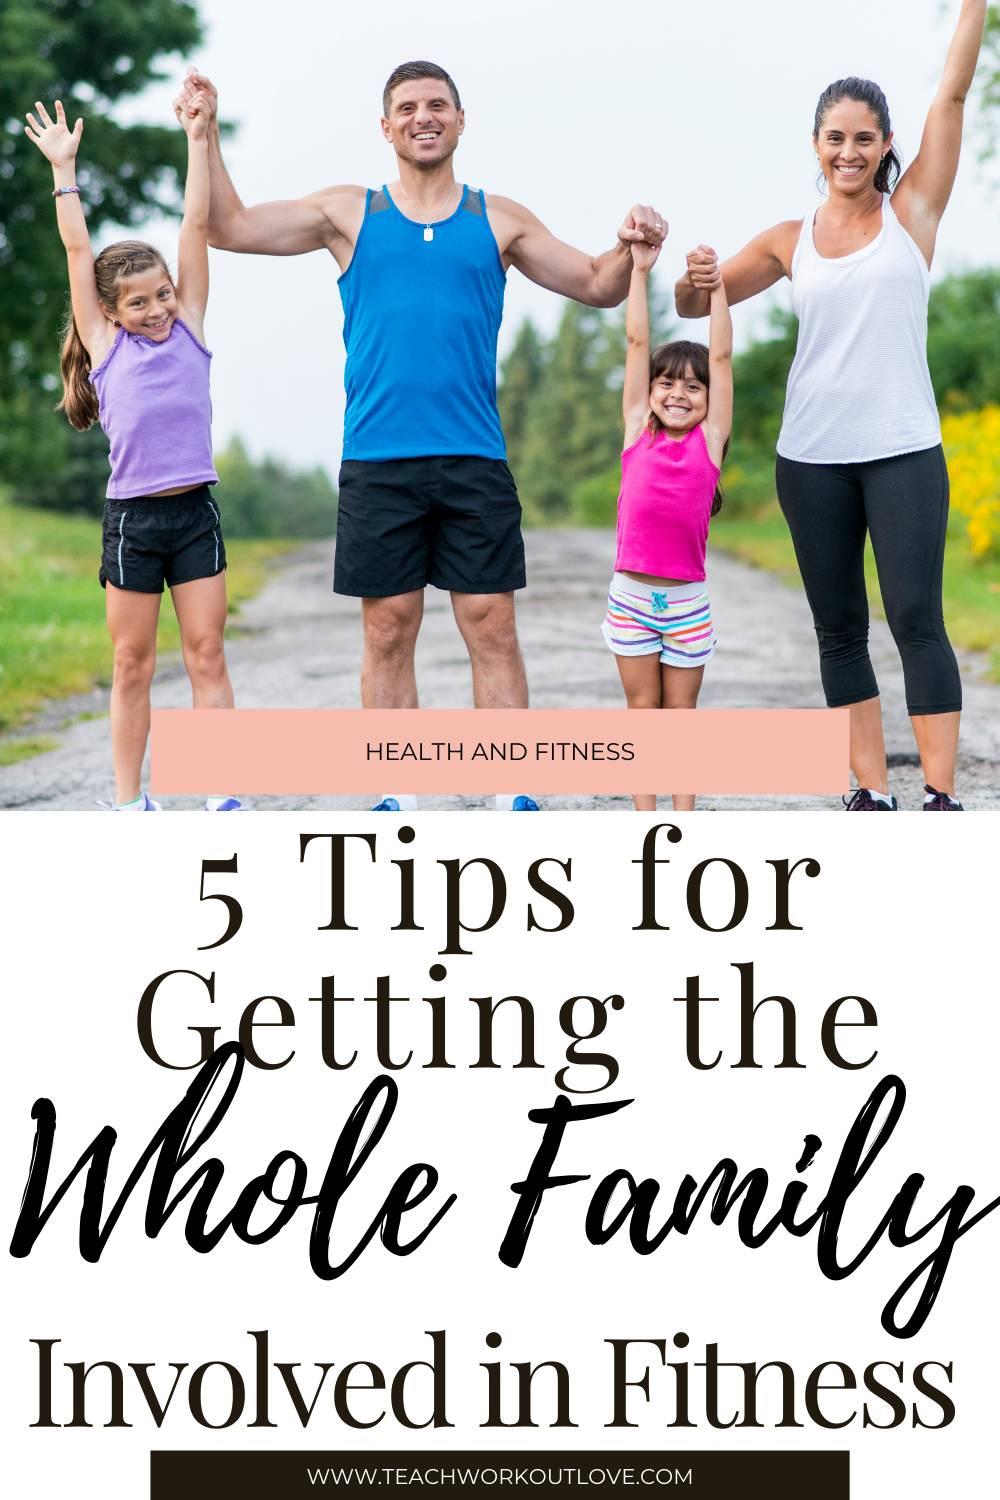 Want to get the whole family involved with fitness? We have some great tips for you and how to make it fun for everyone! 